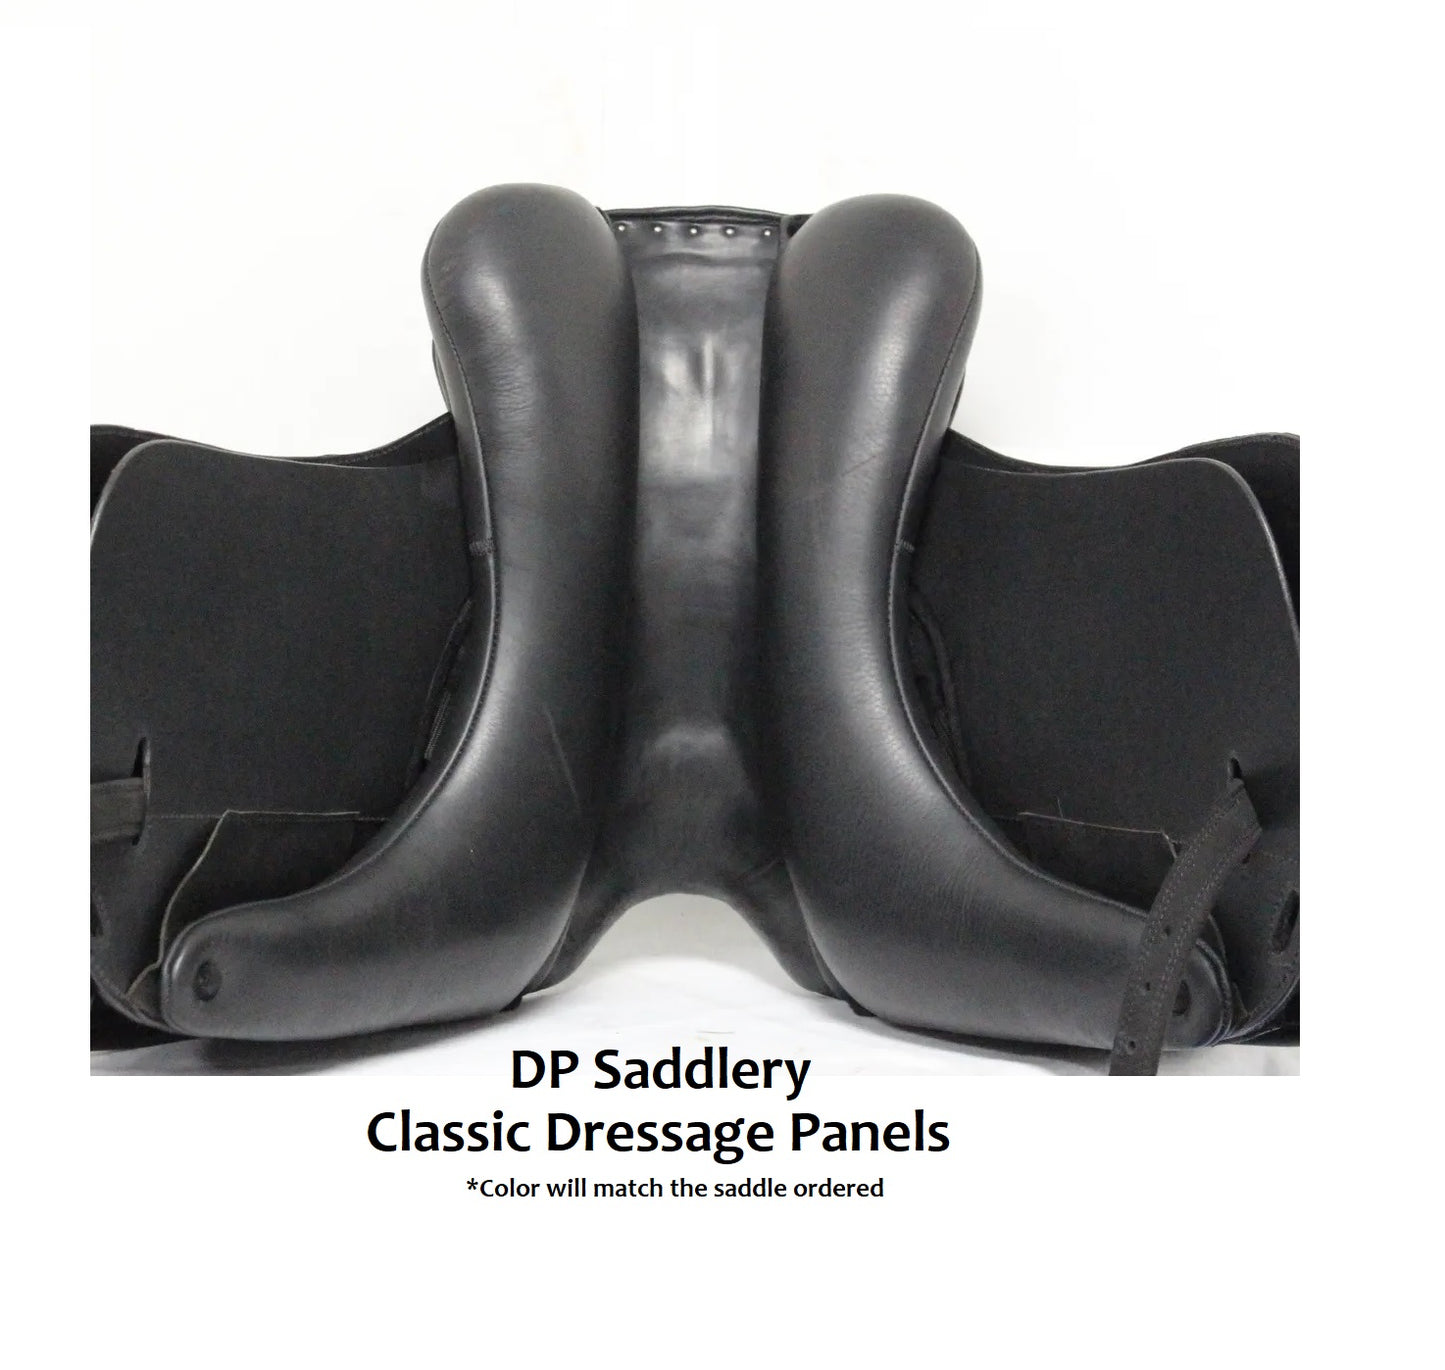 DP Saddlery Classic Dressage 7098 17 in